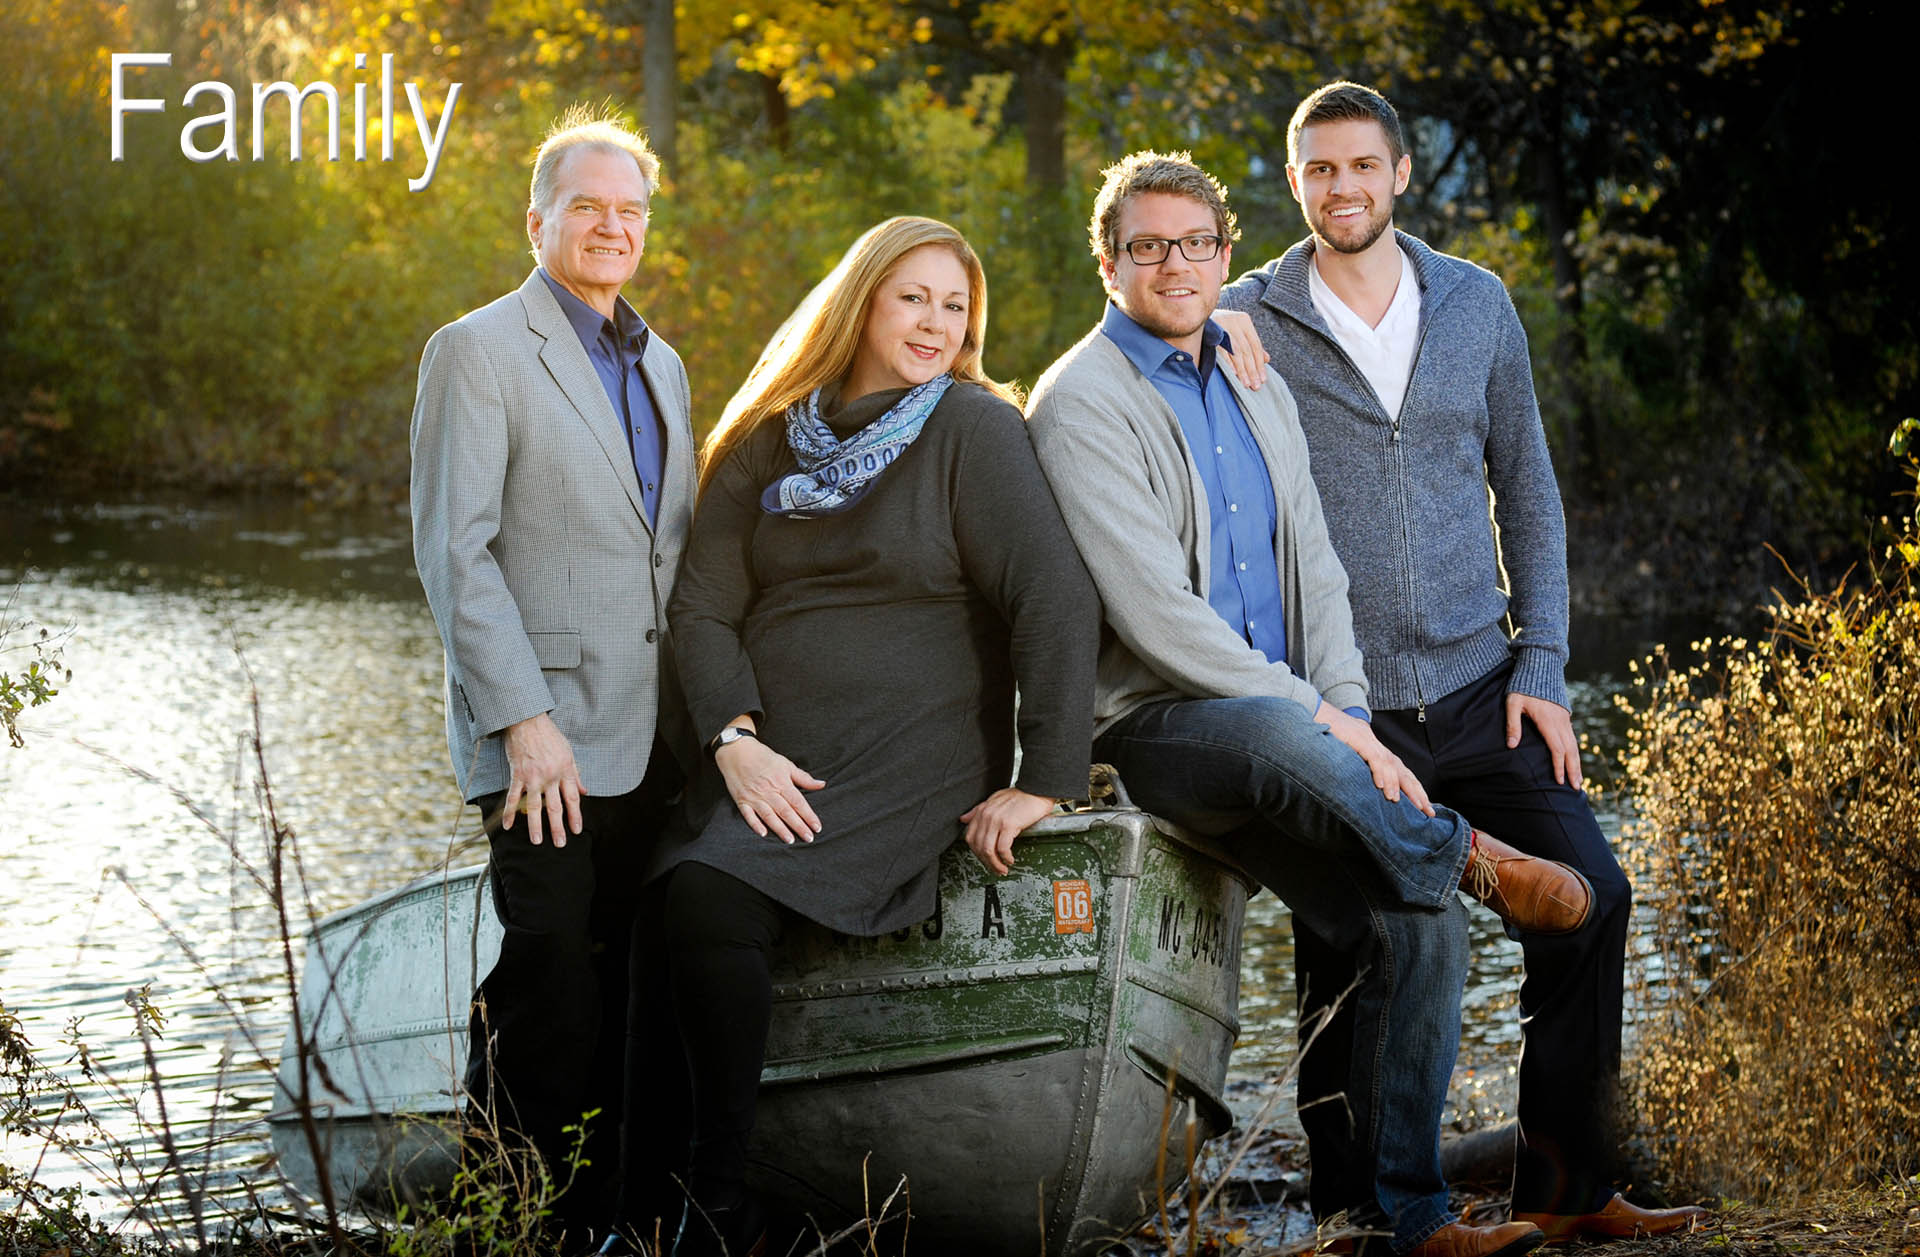 A metro Detroit family features a fun family photo with two generations created by affordable, creative family photographer who takes creative family photos in the Metro Detroit area.